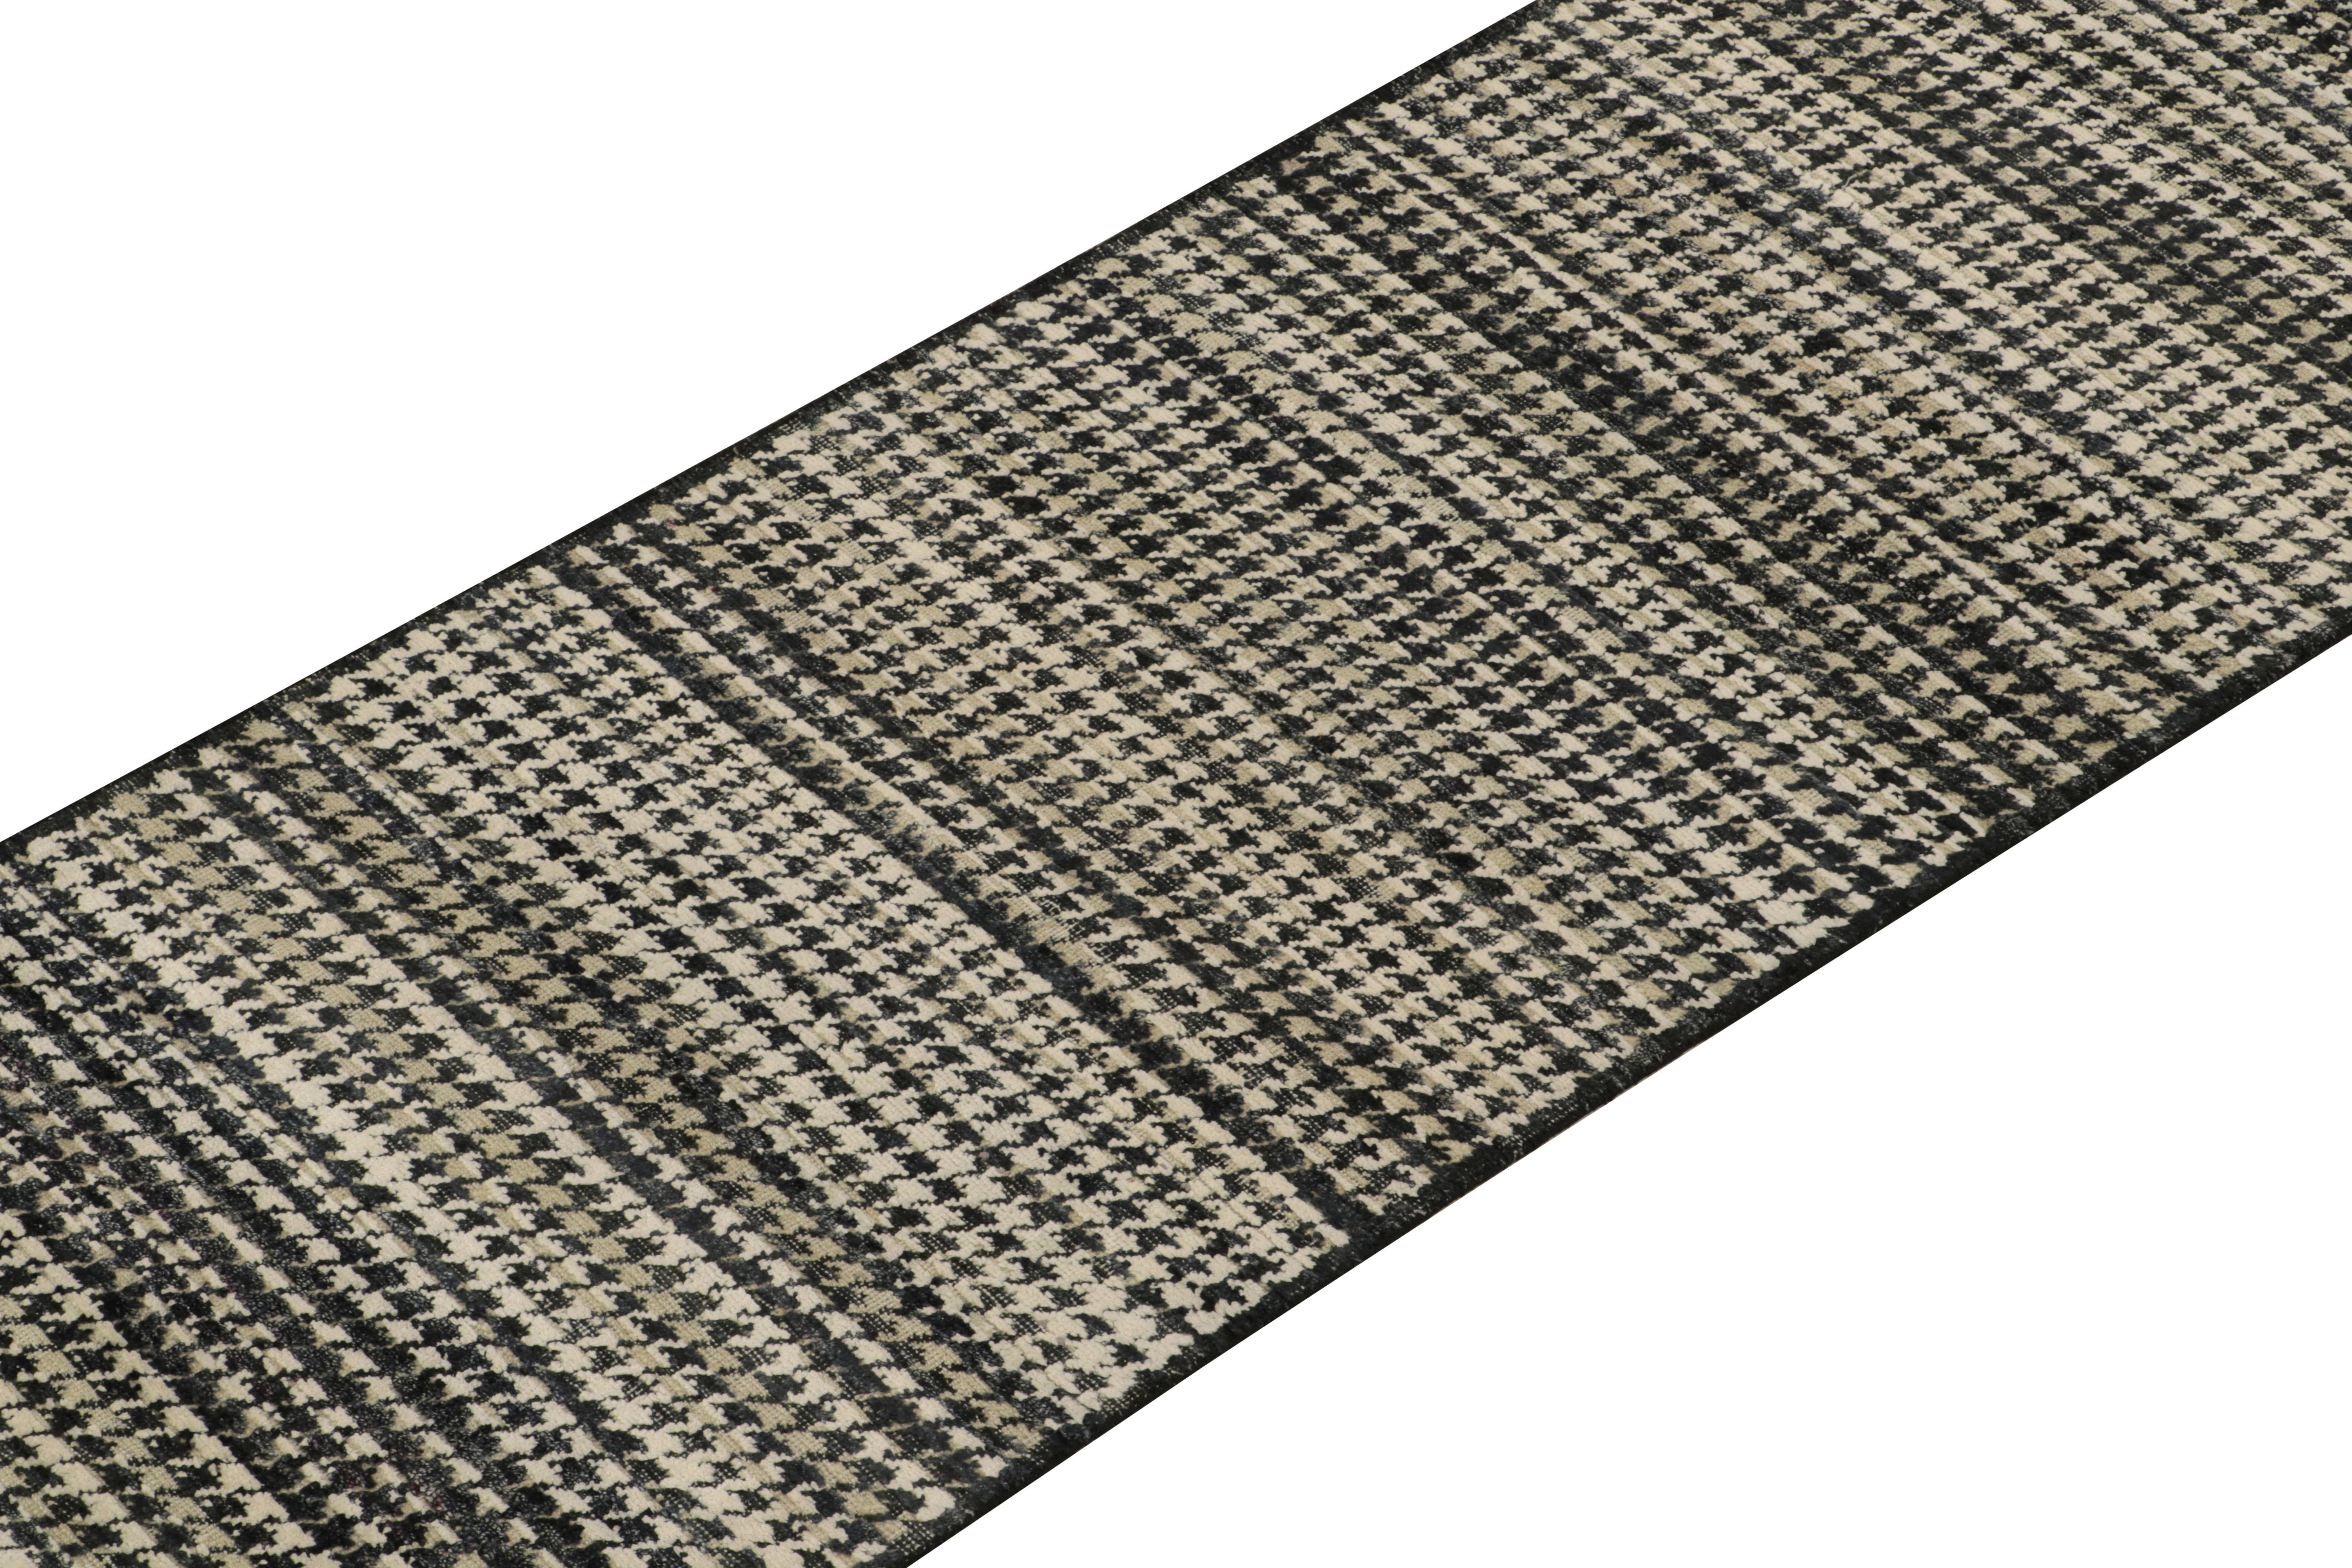 Indian Rug & Kilim’s Contemporary Runner in Black, White & Beige Geometric Pattern For Sale